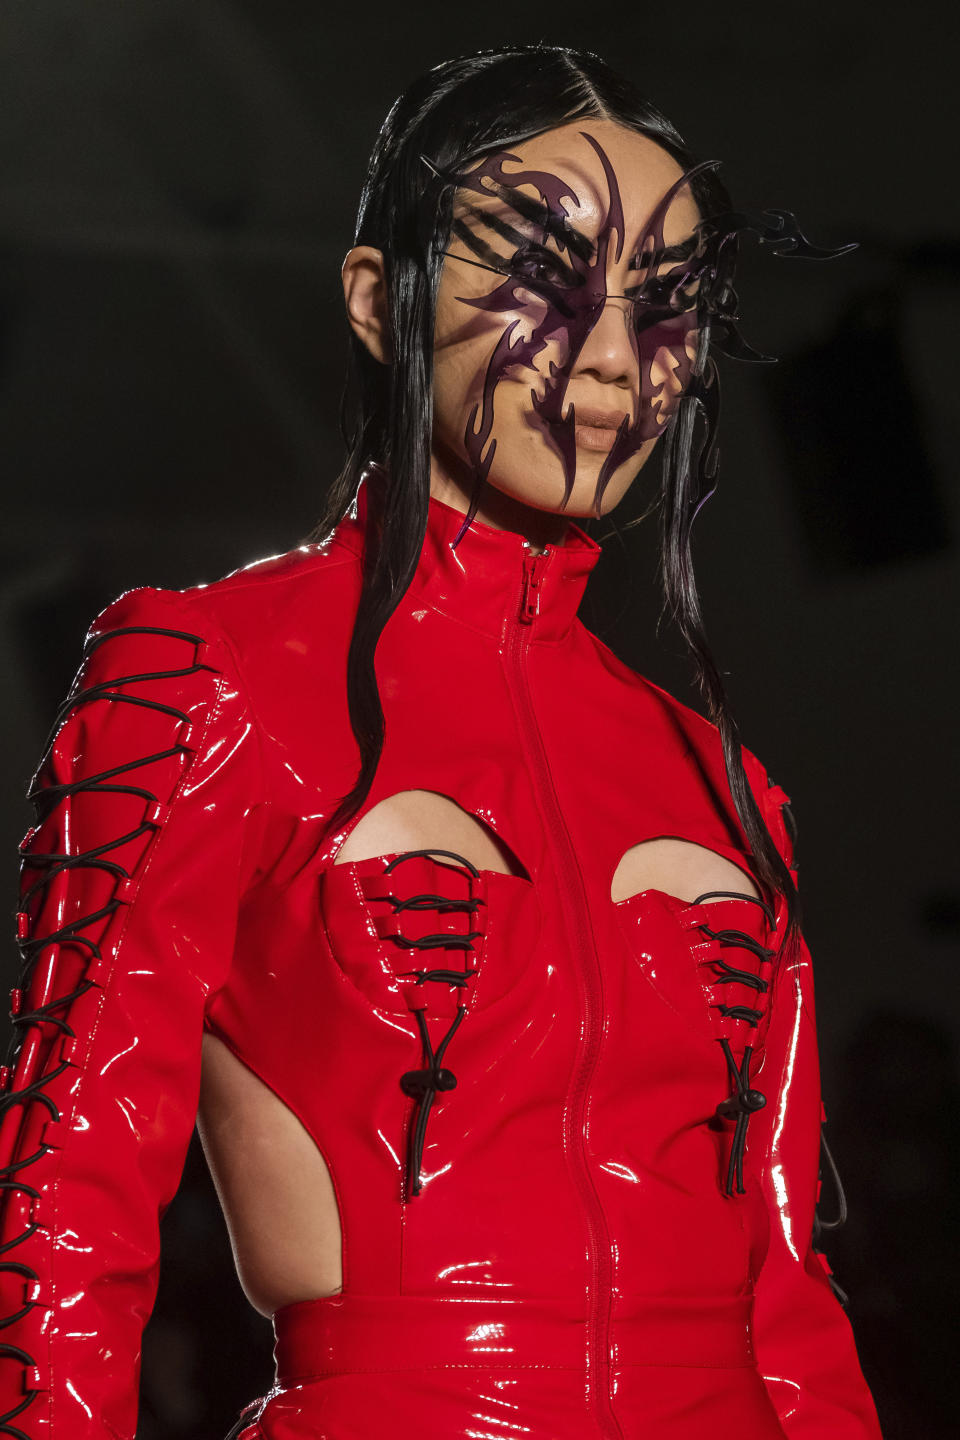 The Namilia collection is modeled at Pier 59 Studios during New York Fashion Week on Sunday, Feb. 9, 2020 in New York. (Photo by Charles Sykes/Invision/AP)